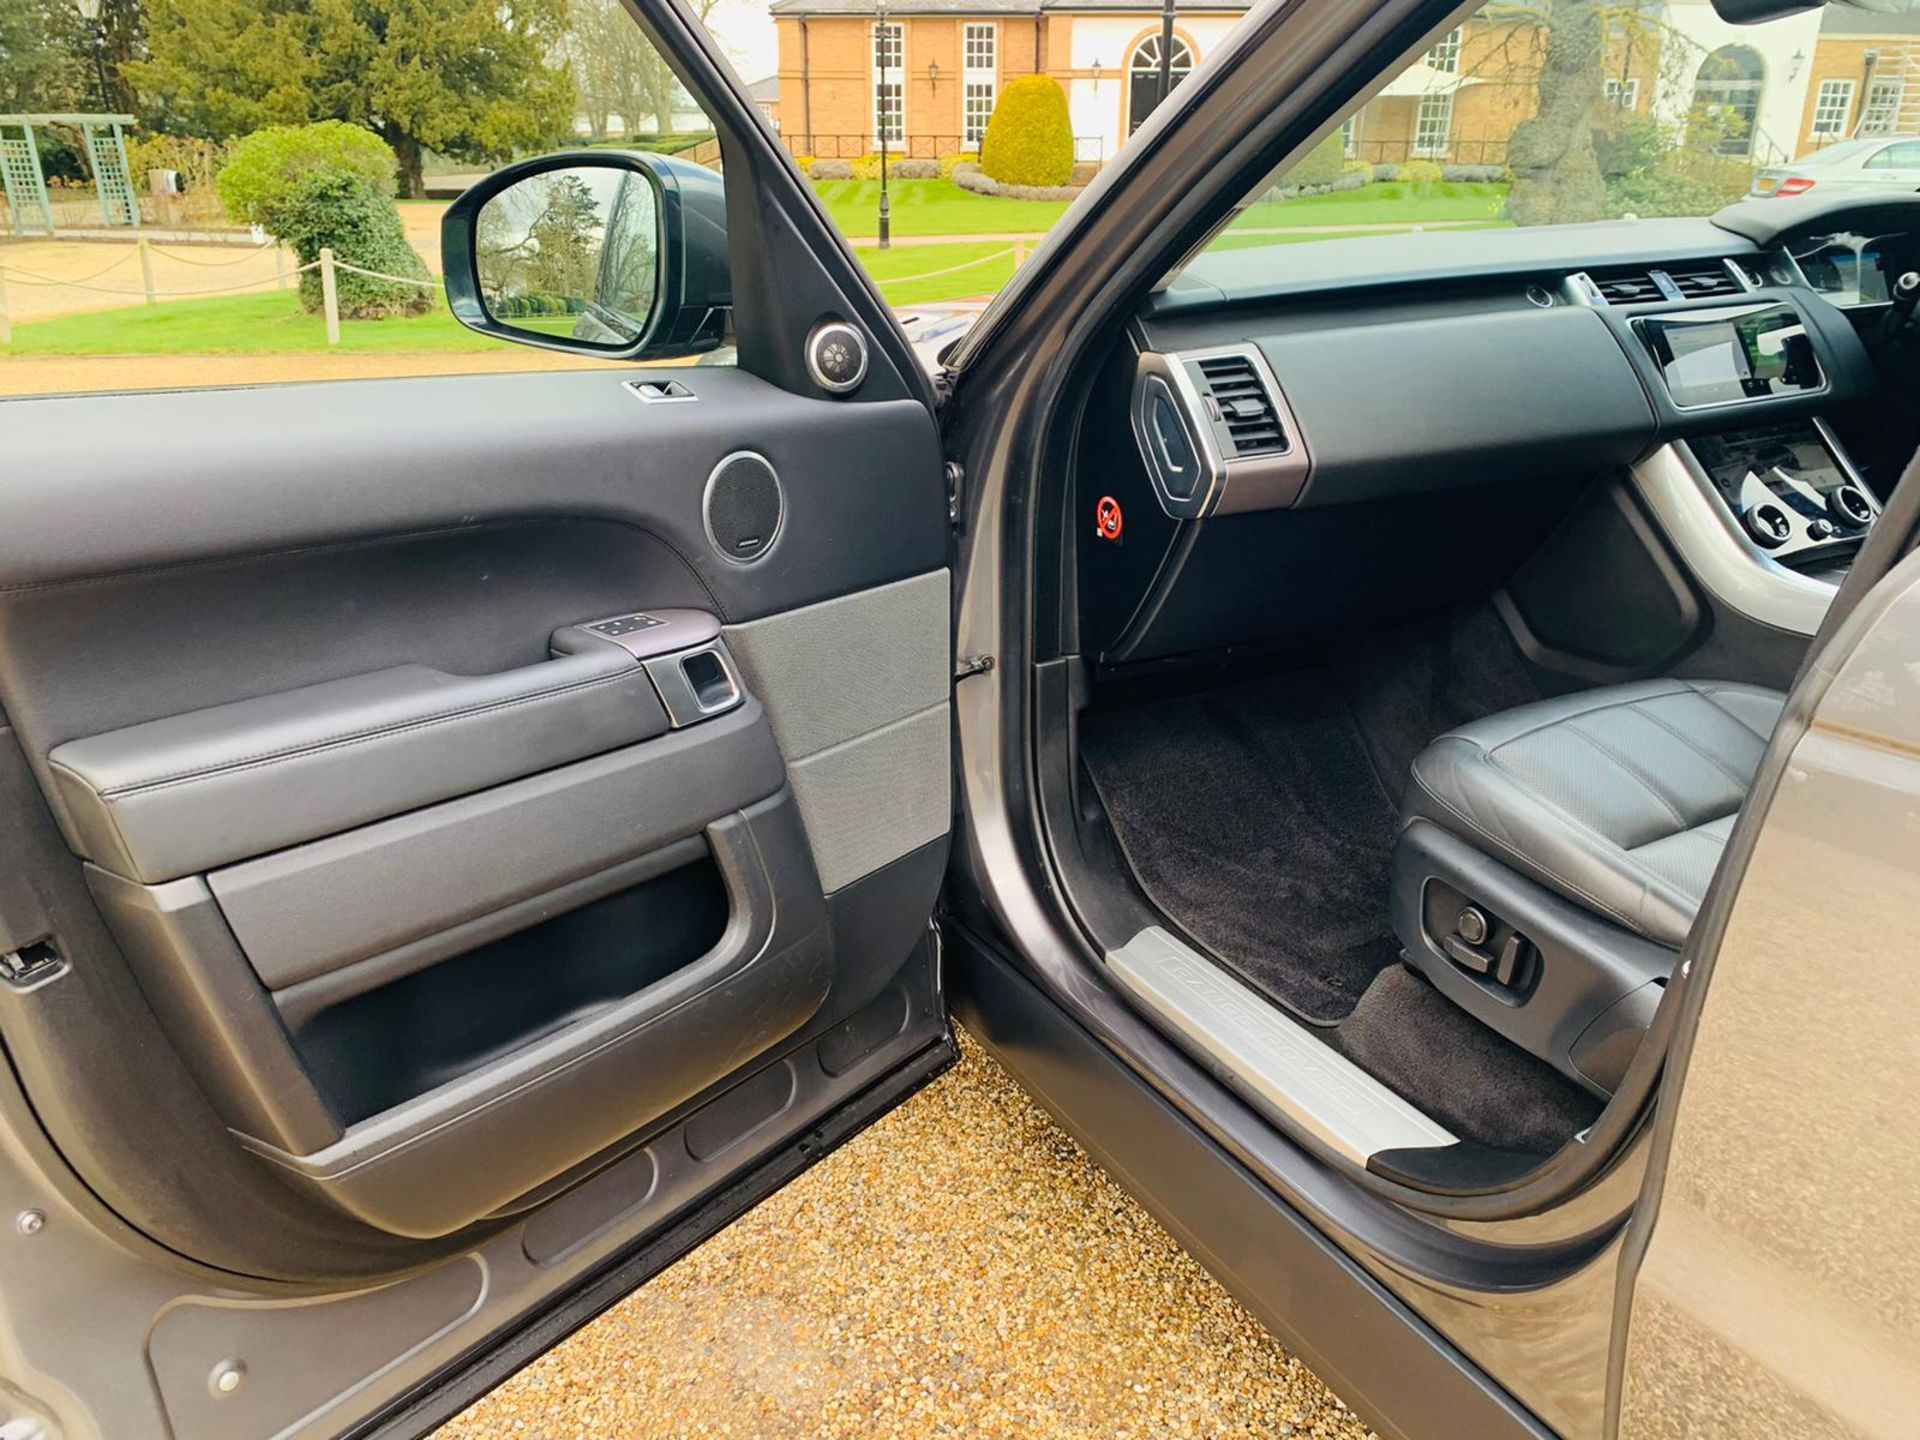 (Reserve Met) Range Rover Sport 3.0 SDV6 HSE Auto (302 BHP) (2019) 1 Keeper From New-Virtual Cockpit - Image 38 of 41